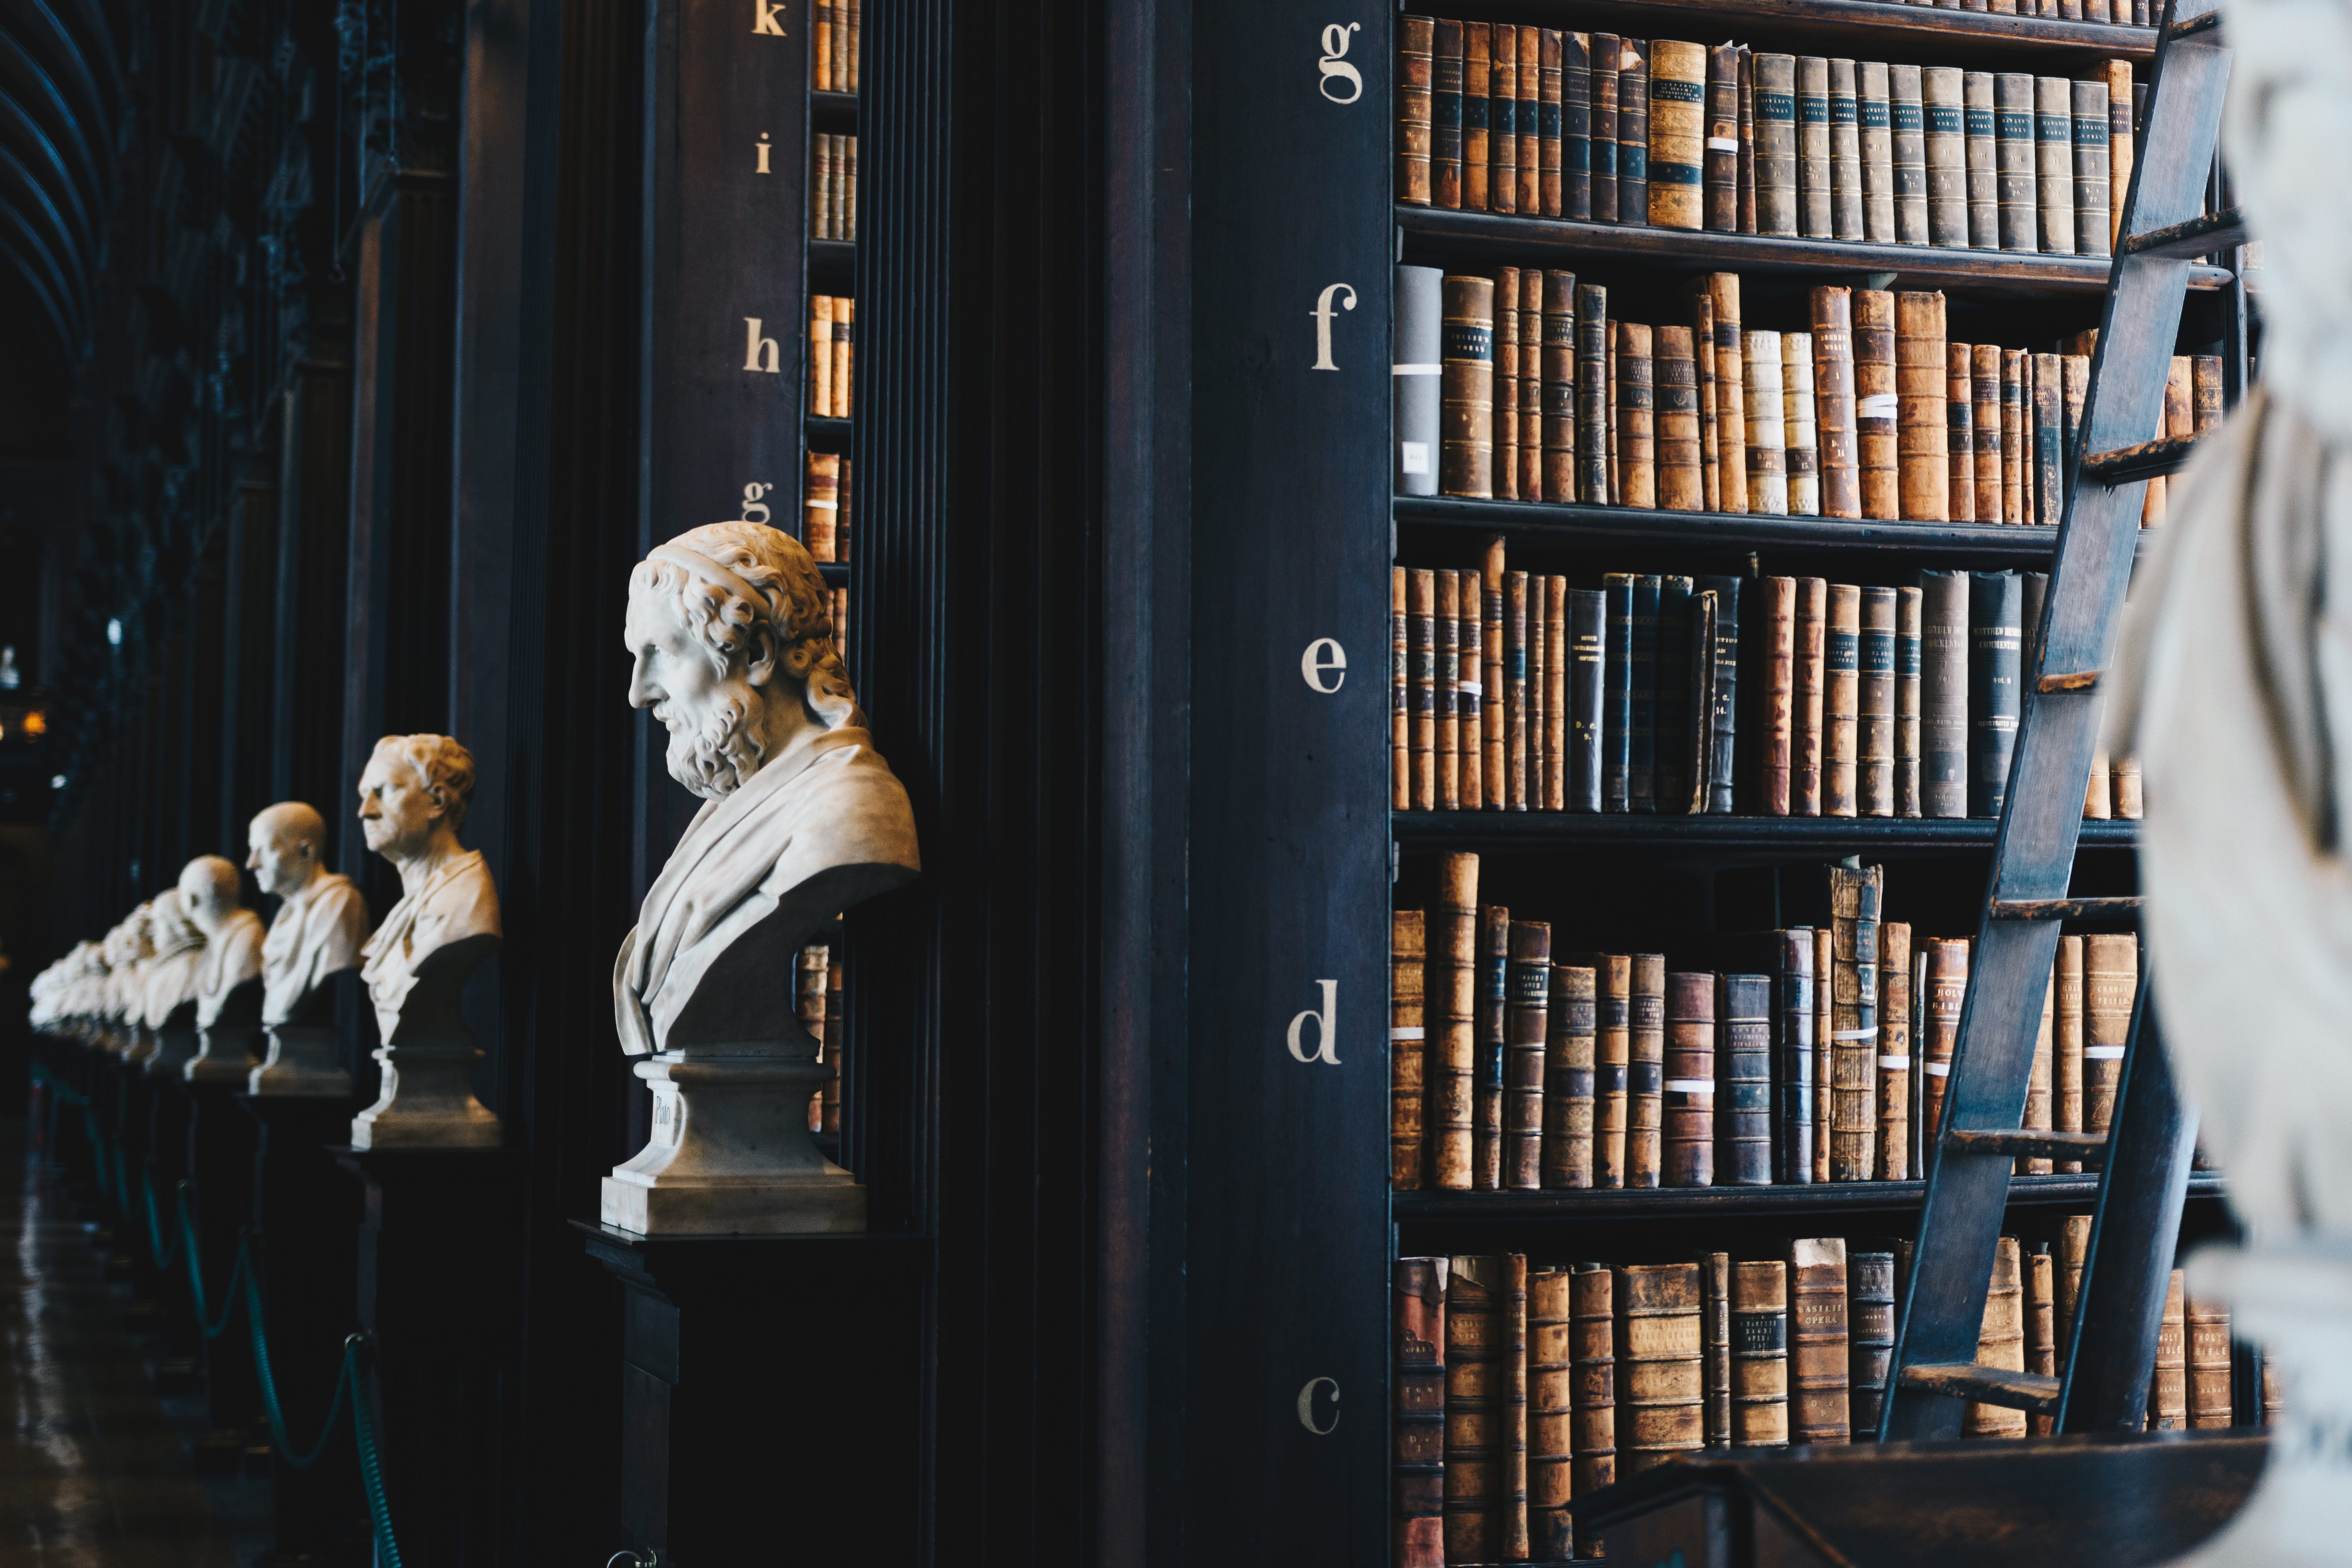 Library shelves with busts of famous people; image by Giammarco Boscaro, via Unsplash.com.